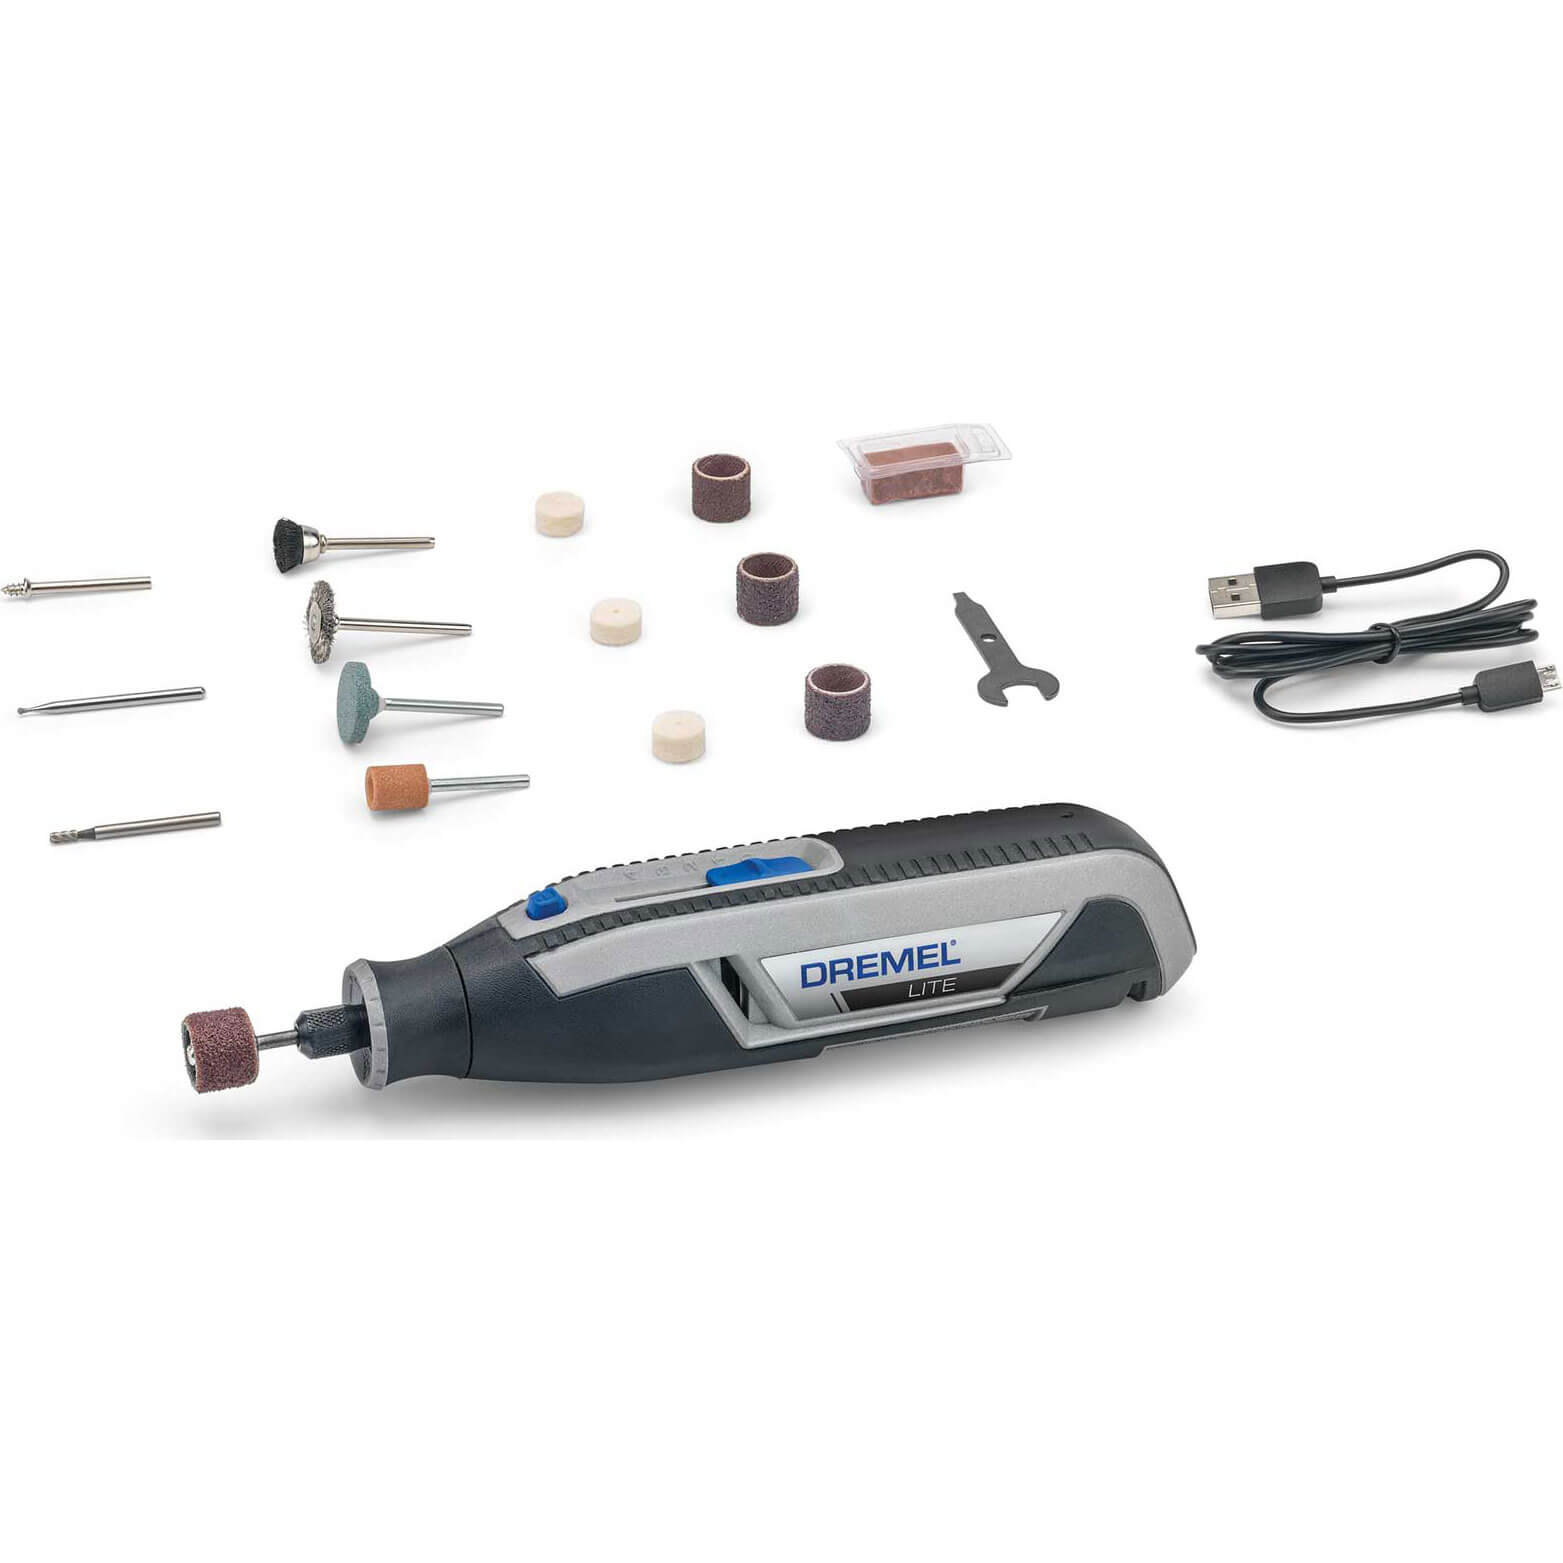 Dremel Lite 7760 N/10 4V Li-Ion Cordless Rotary Tool Variable Speed  Multi-Purpose Rotary Tool Kit, USB Charging, Easy Accessory Changes -  Perfect For